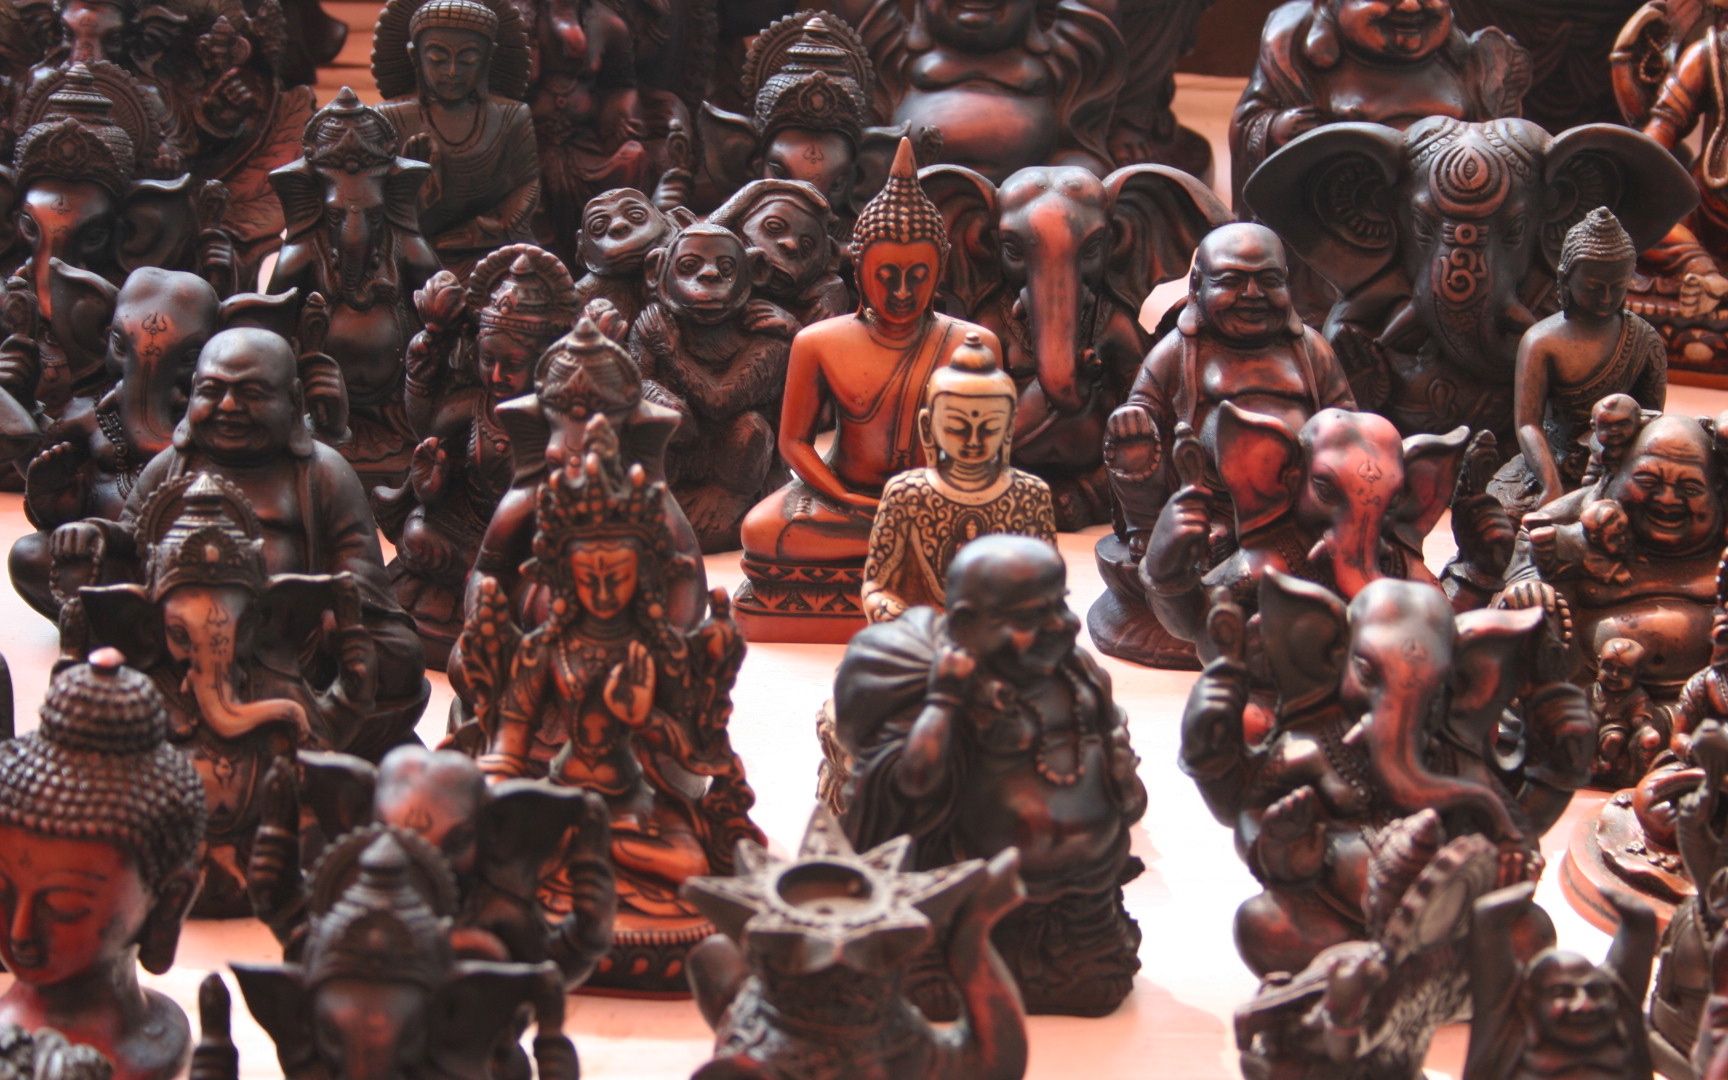 a pile of decorative ceramic statues on display